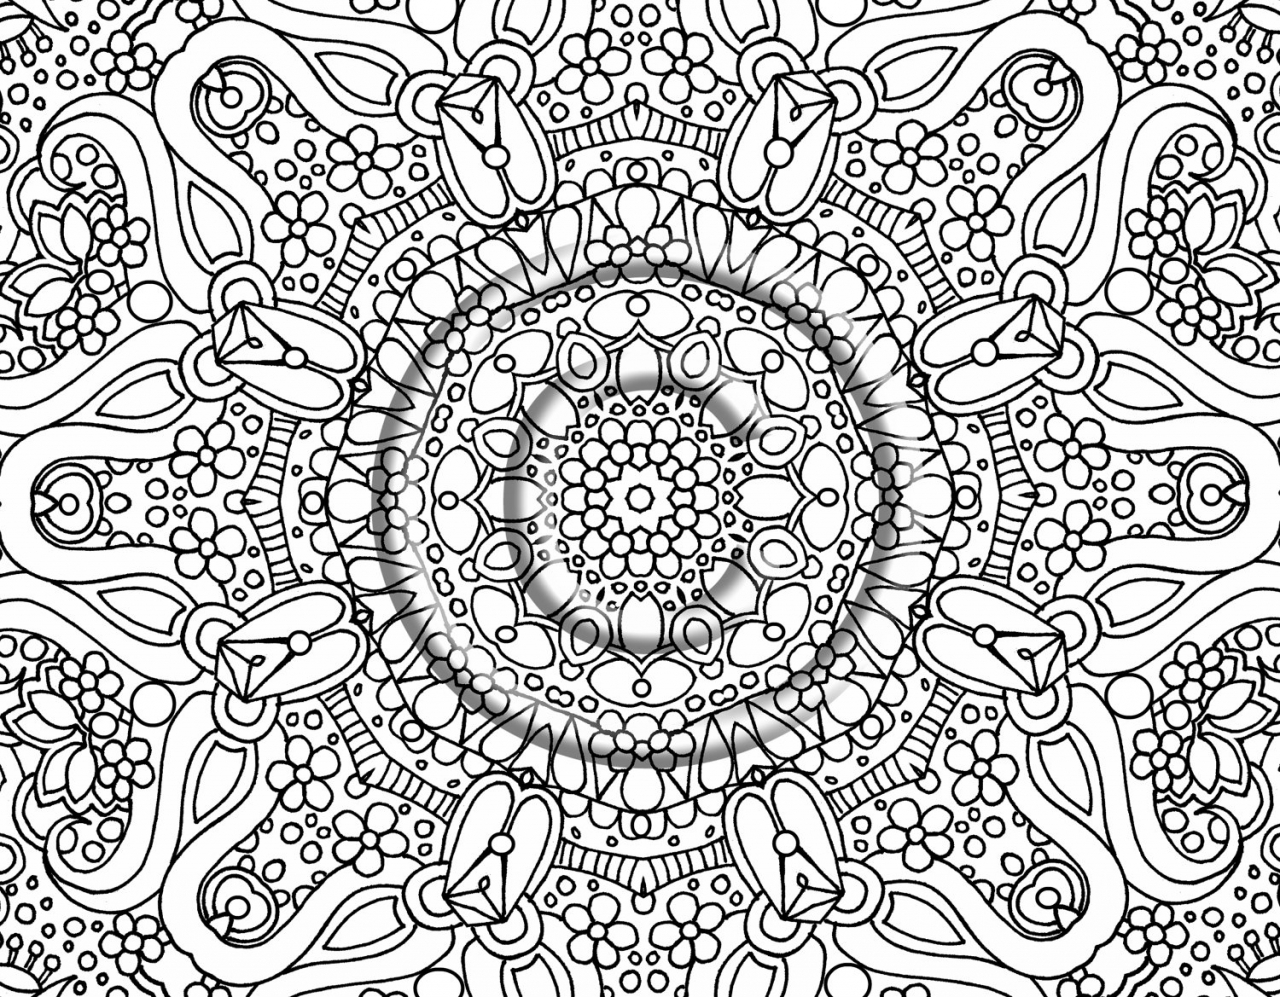 Get This Difficult Coloring Pages for Grown Ups 61829